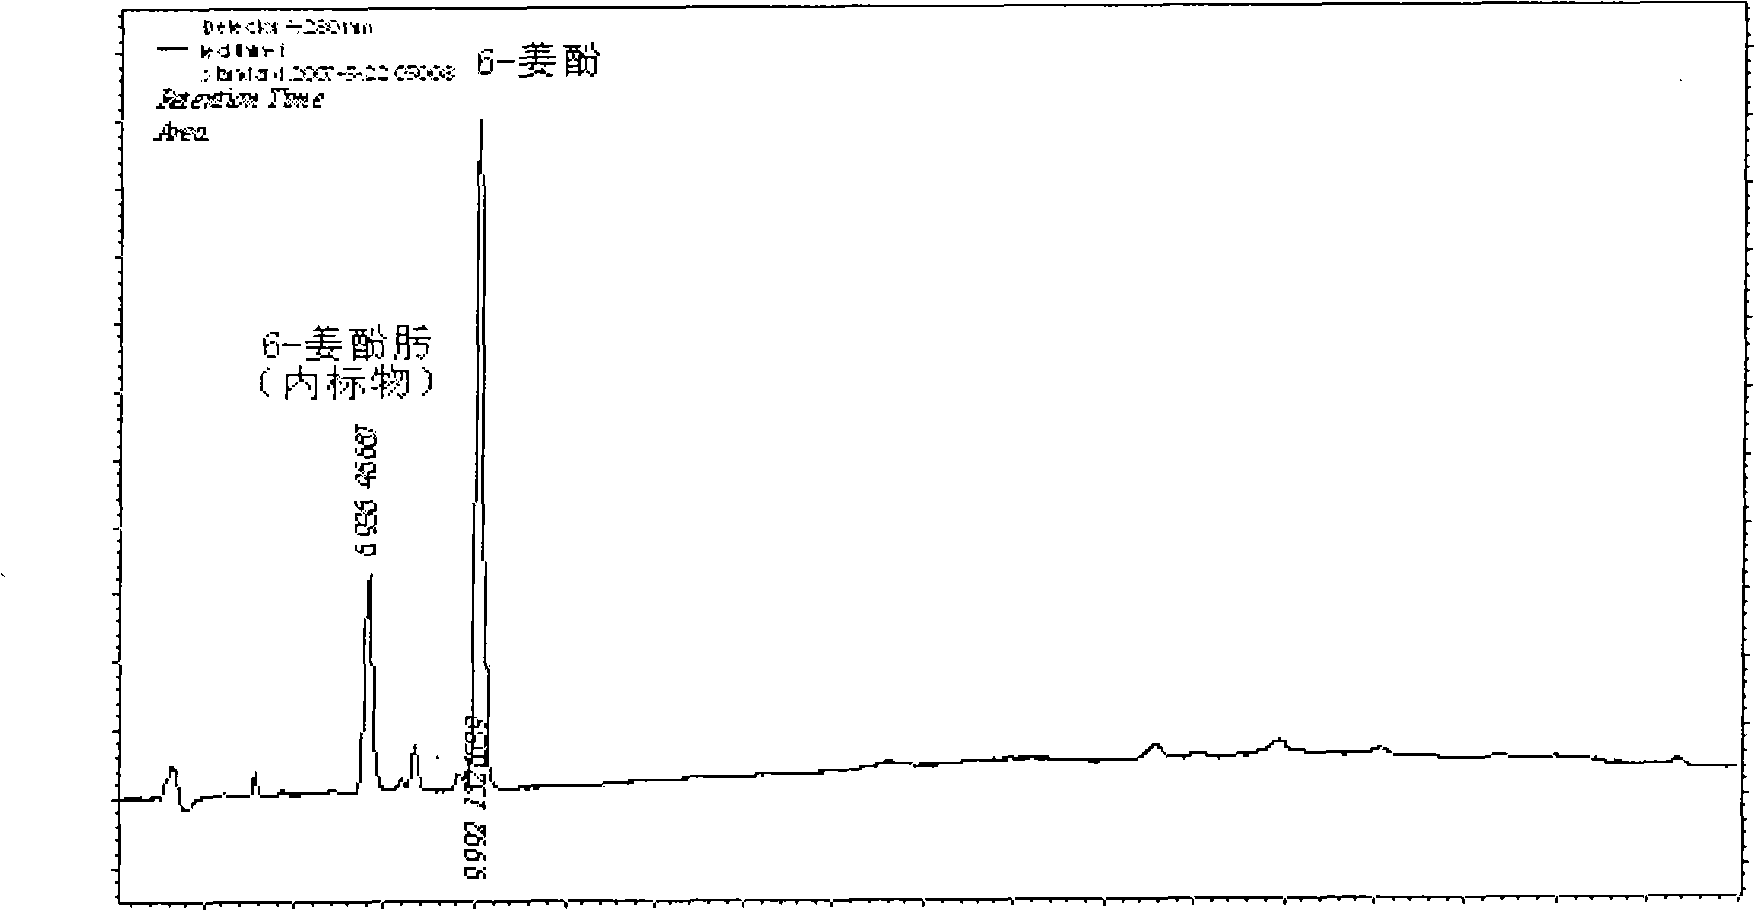 Molecular engram polymer for purifying 6-gingerol as well as preparation and uses thereof